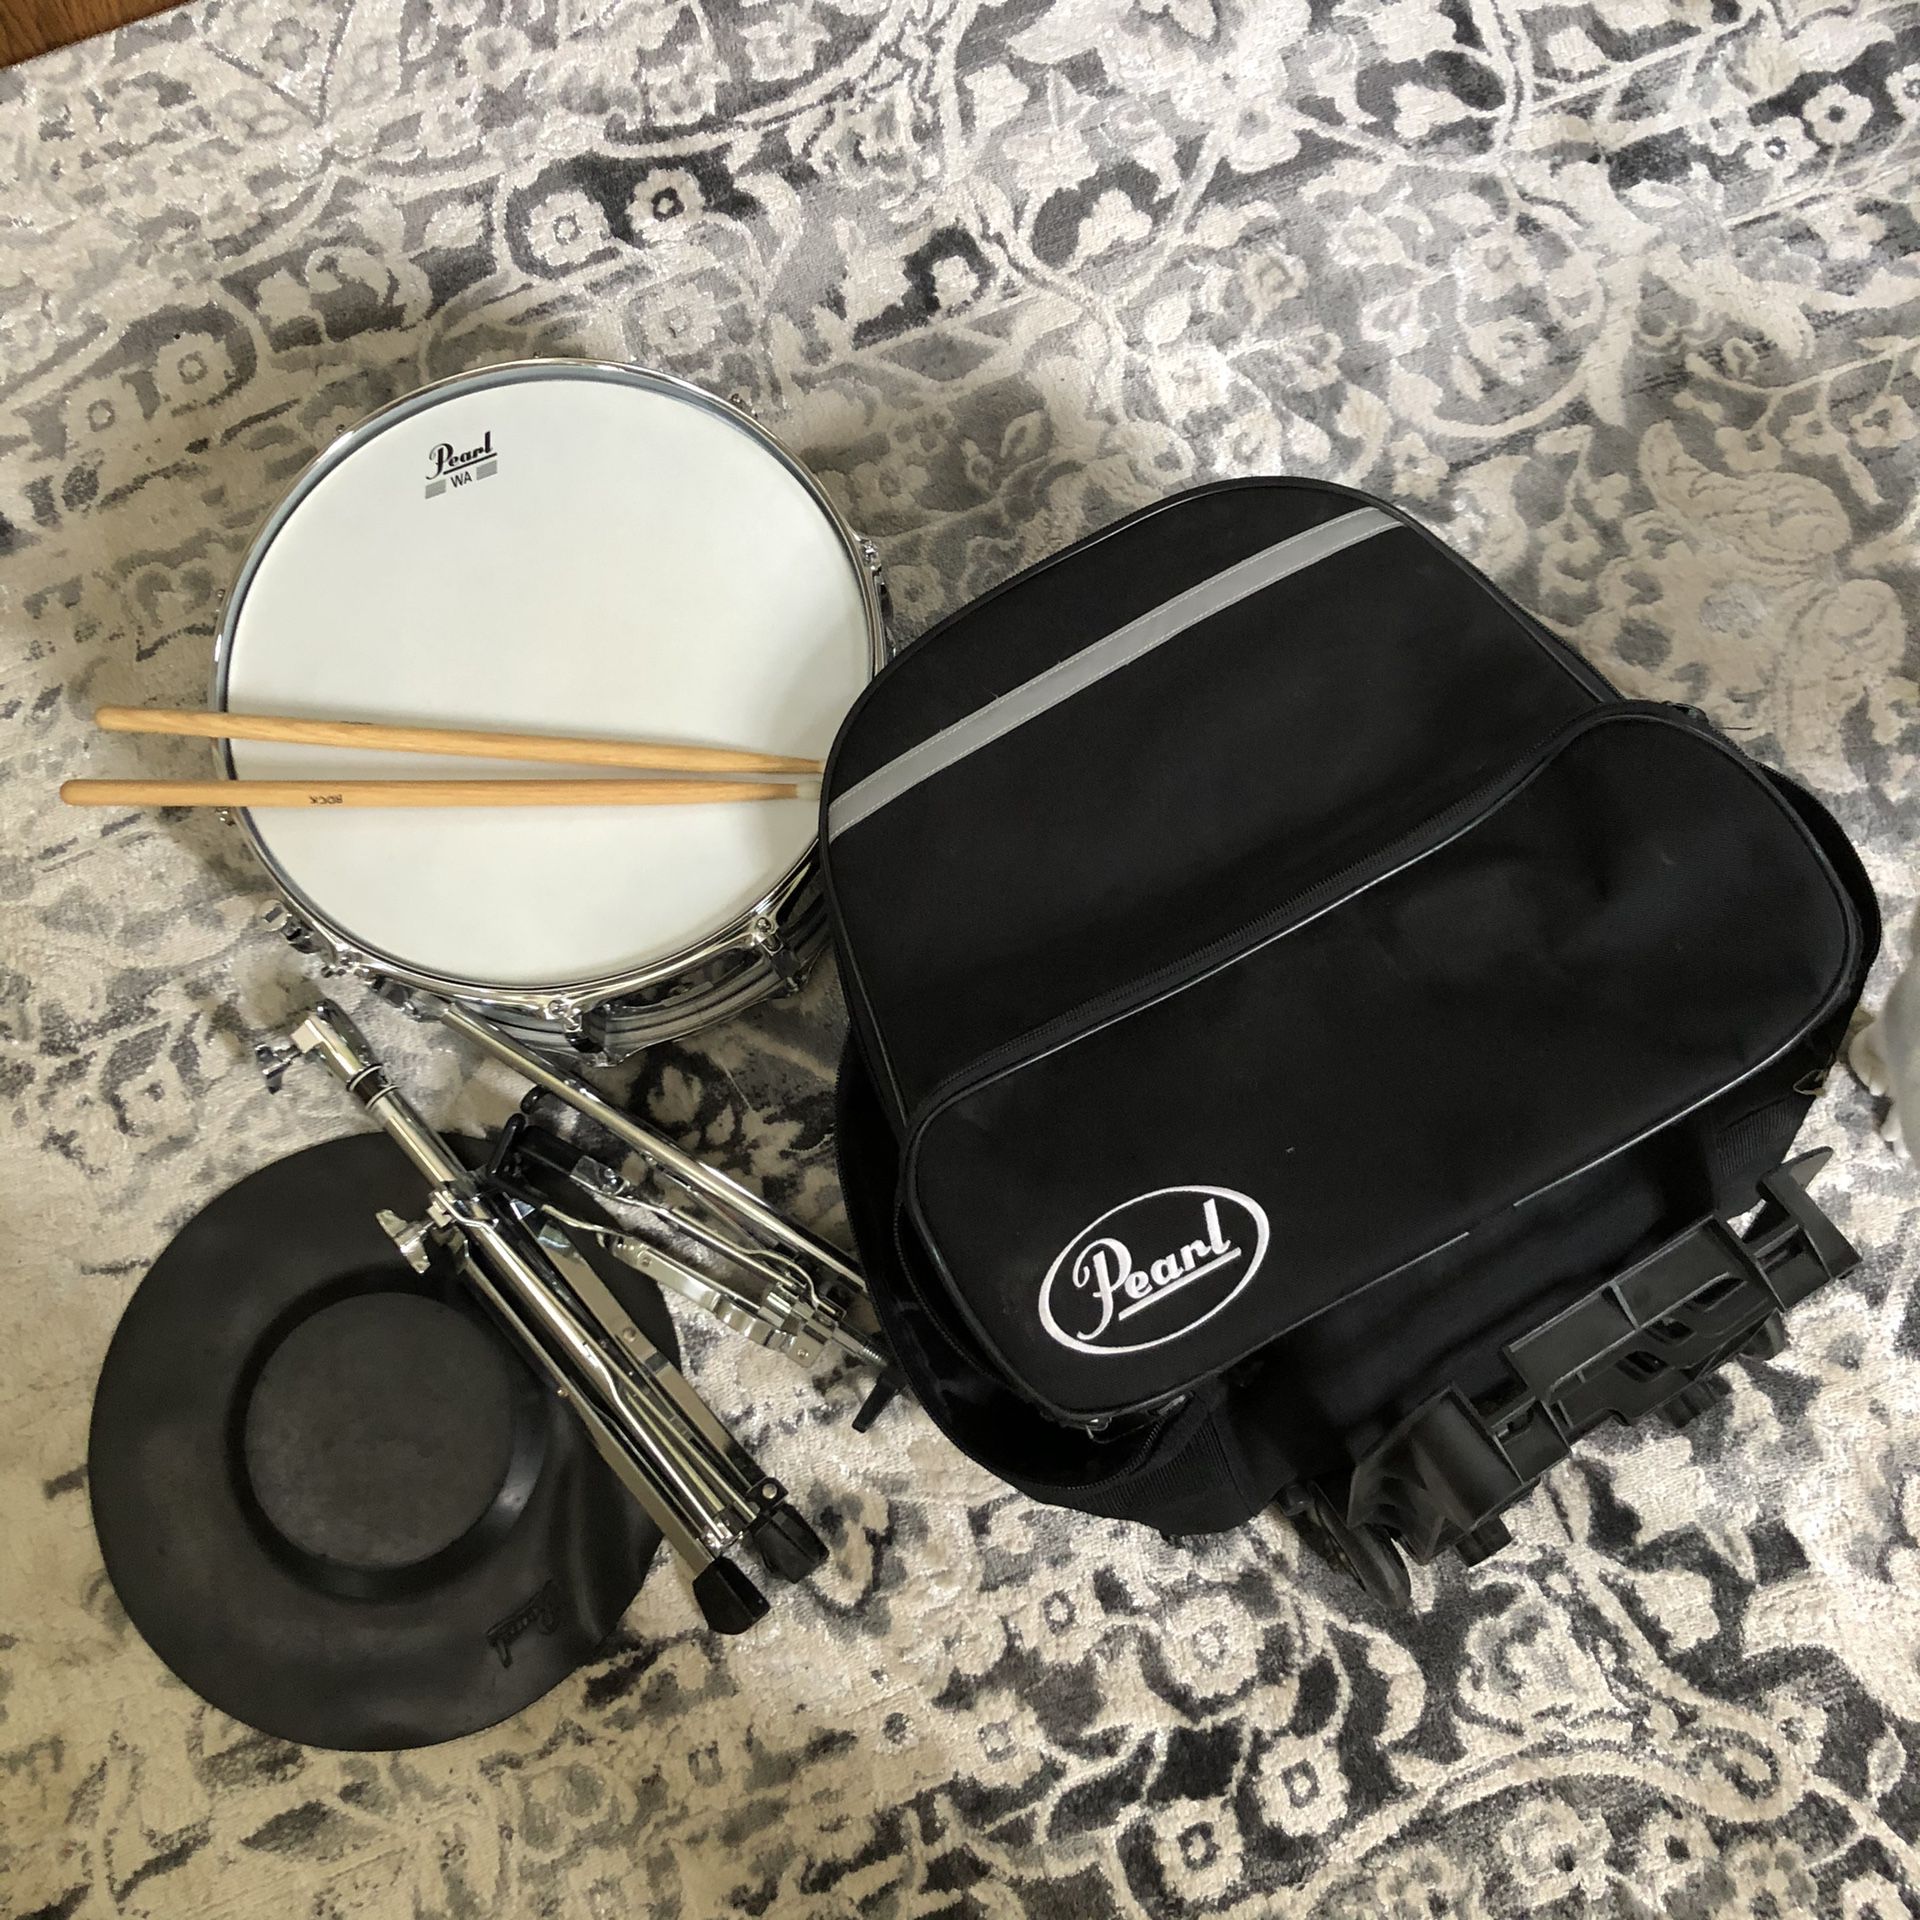 Pearl Snare Drum Kit - drum, stand, rolling bag